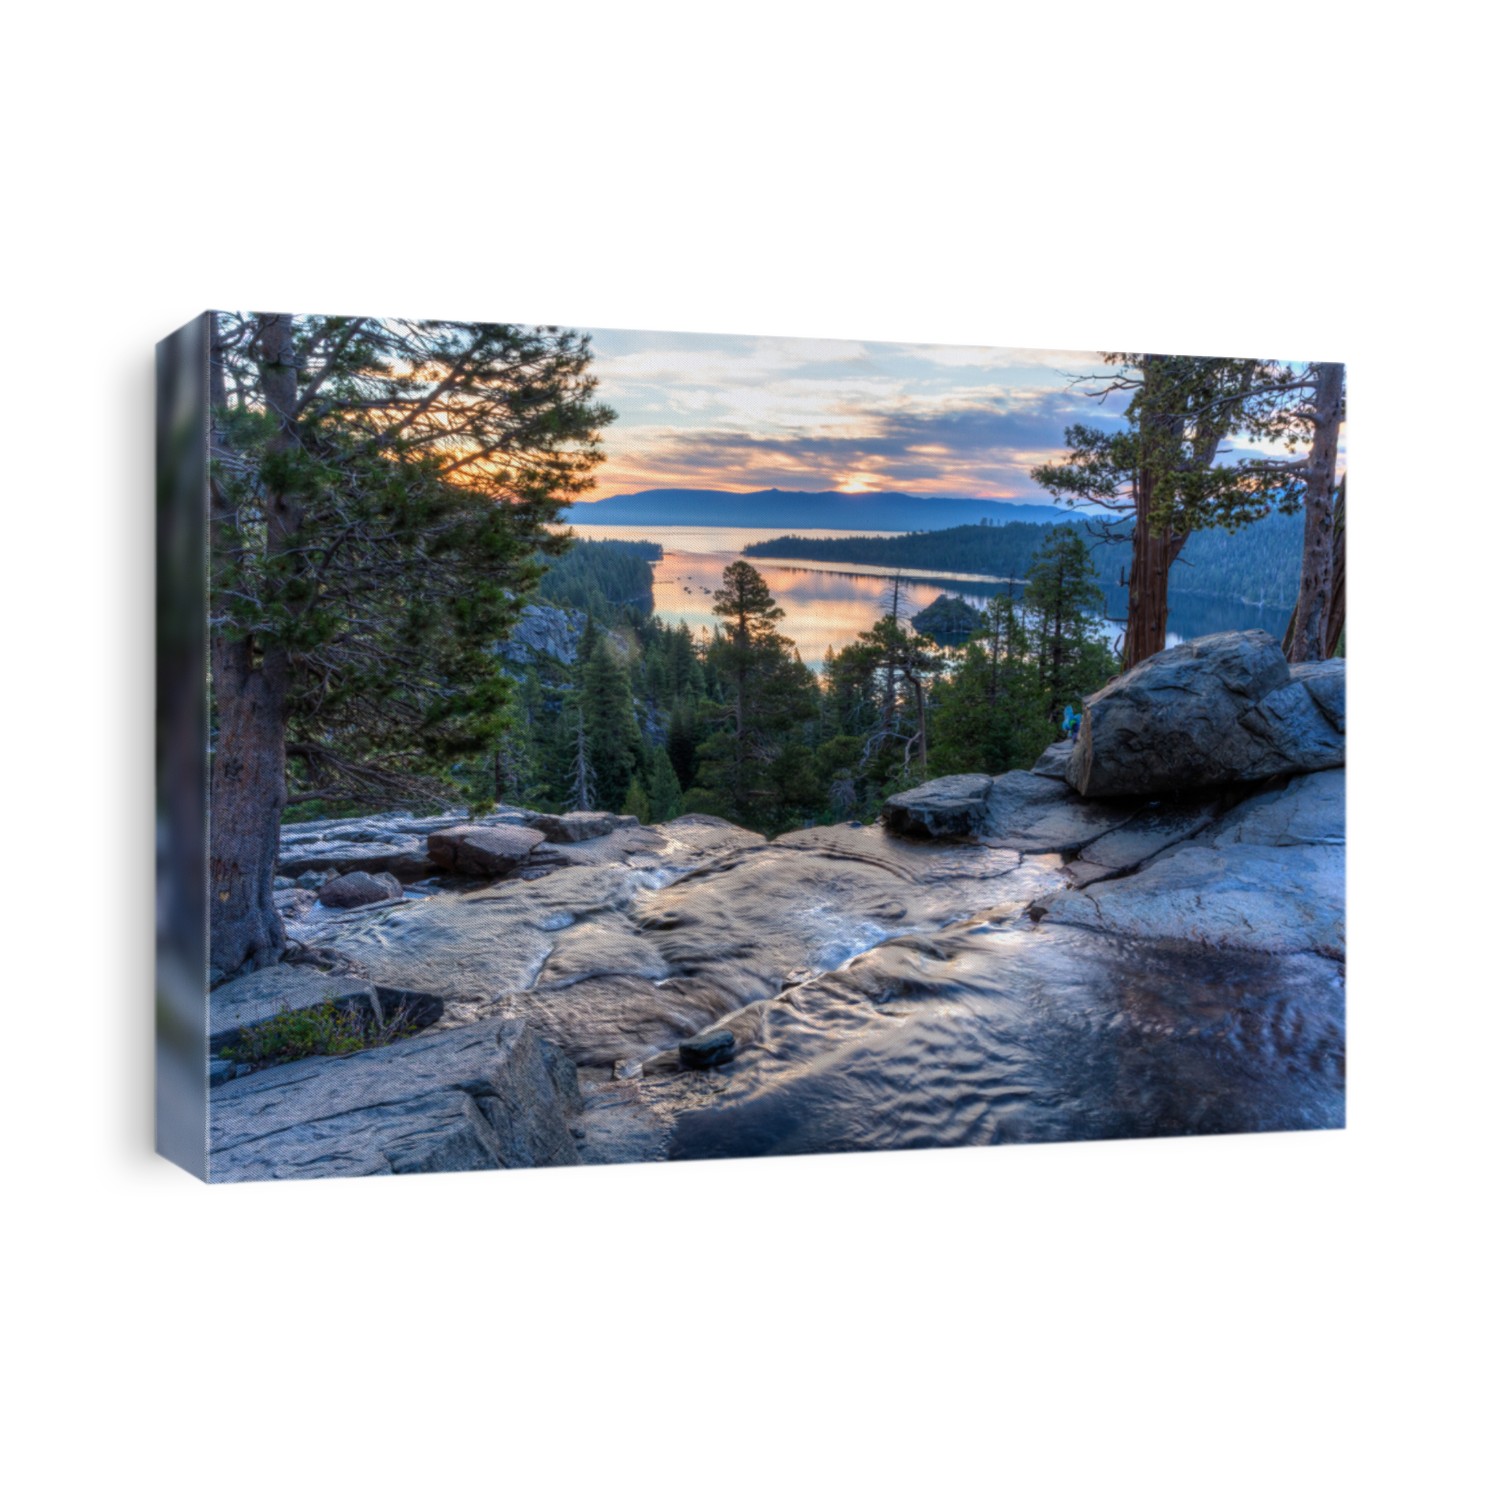 Colorful sunrise on Emerald Bay from the top of Eagle Falls off Lake Tahoe in California.